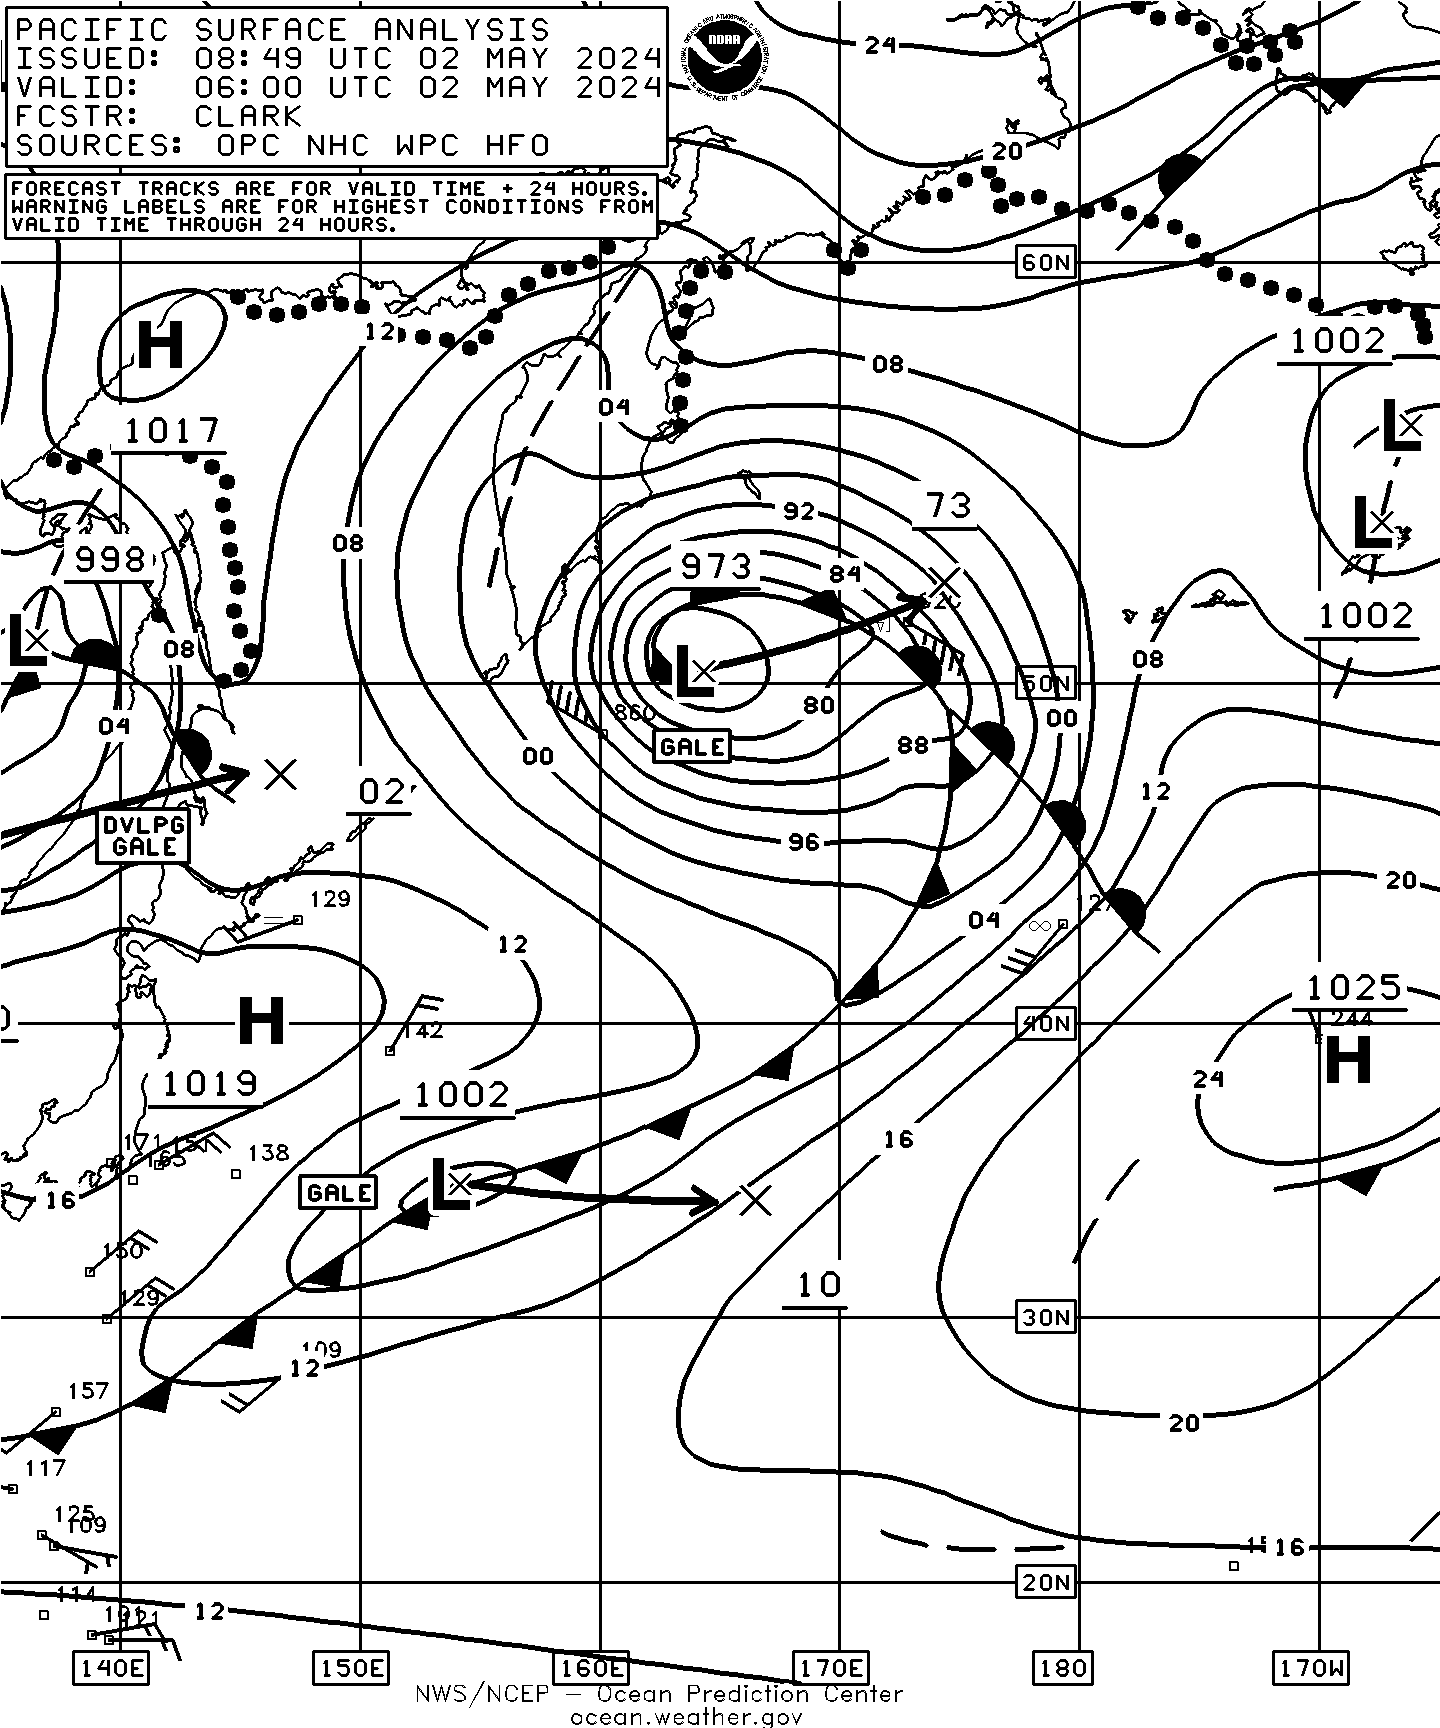 Image of West Pacific Surface Analysis